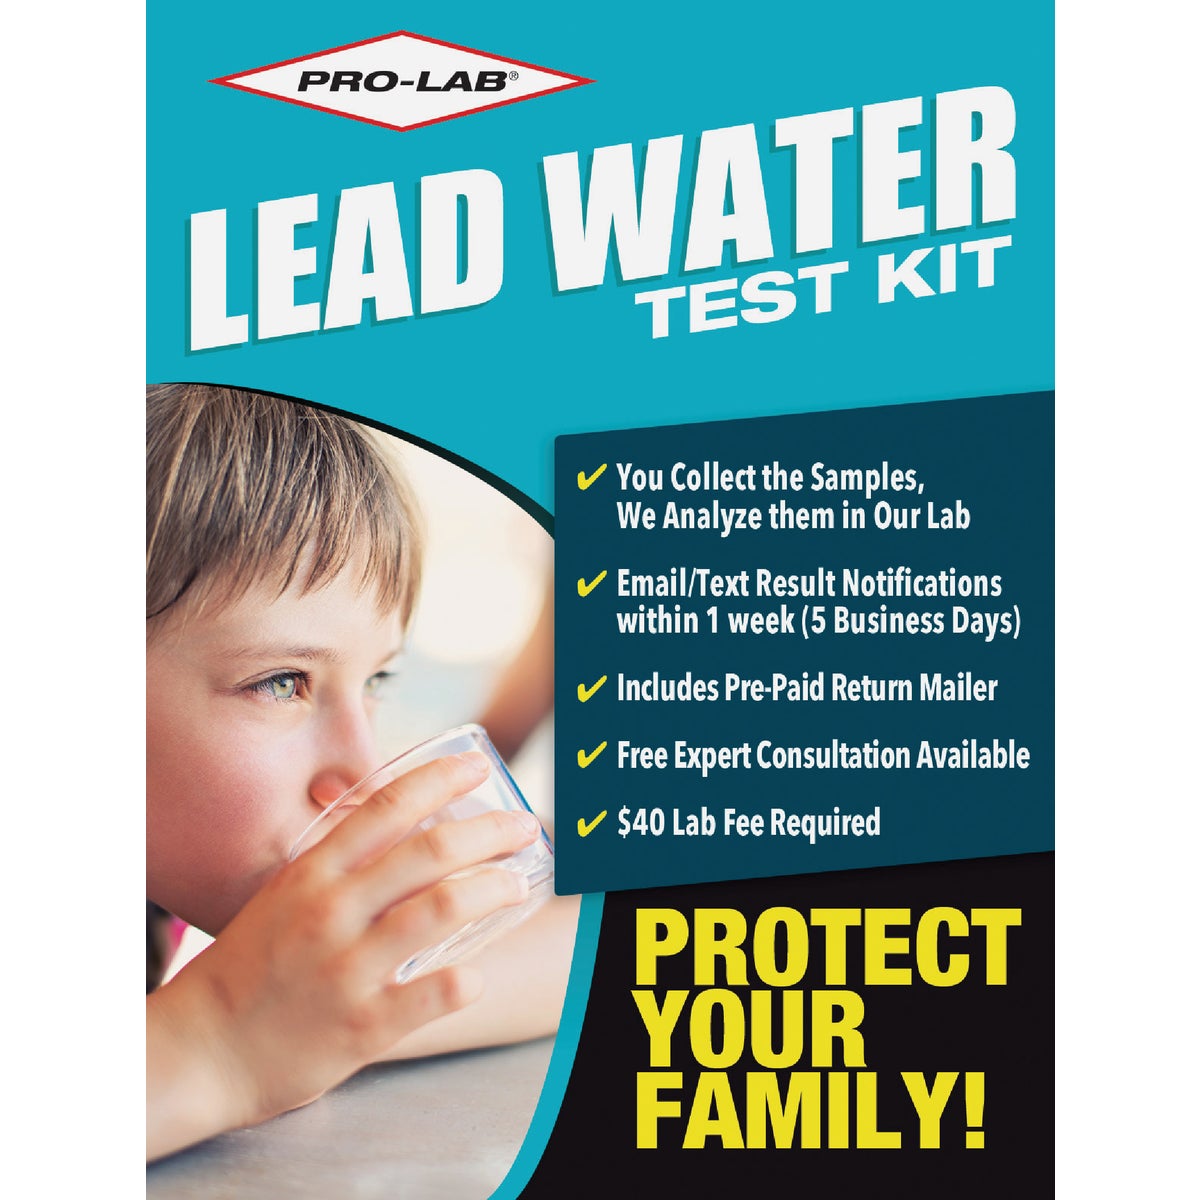 Item 426159, Simple to use DIY test kit checks your water for lead from faucets, private